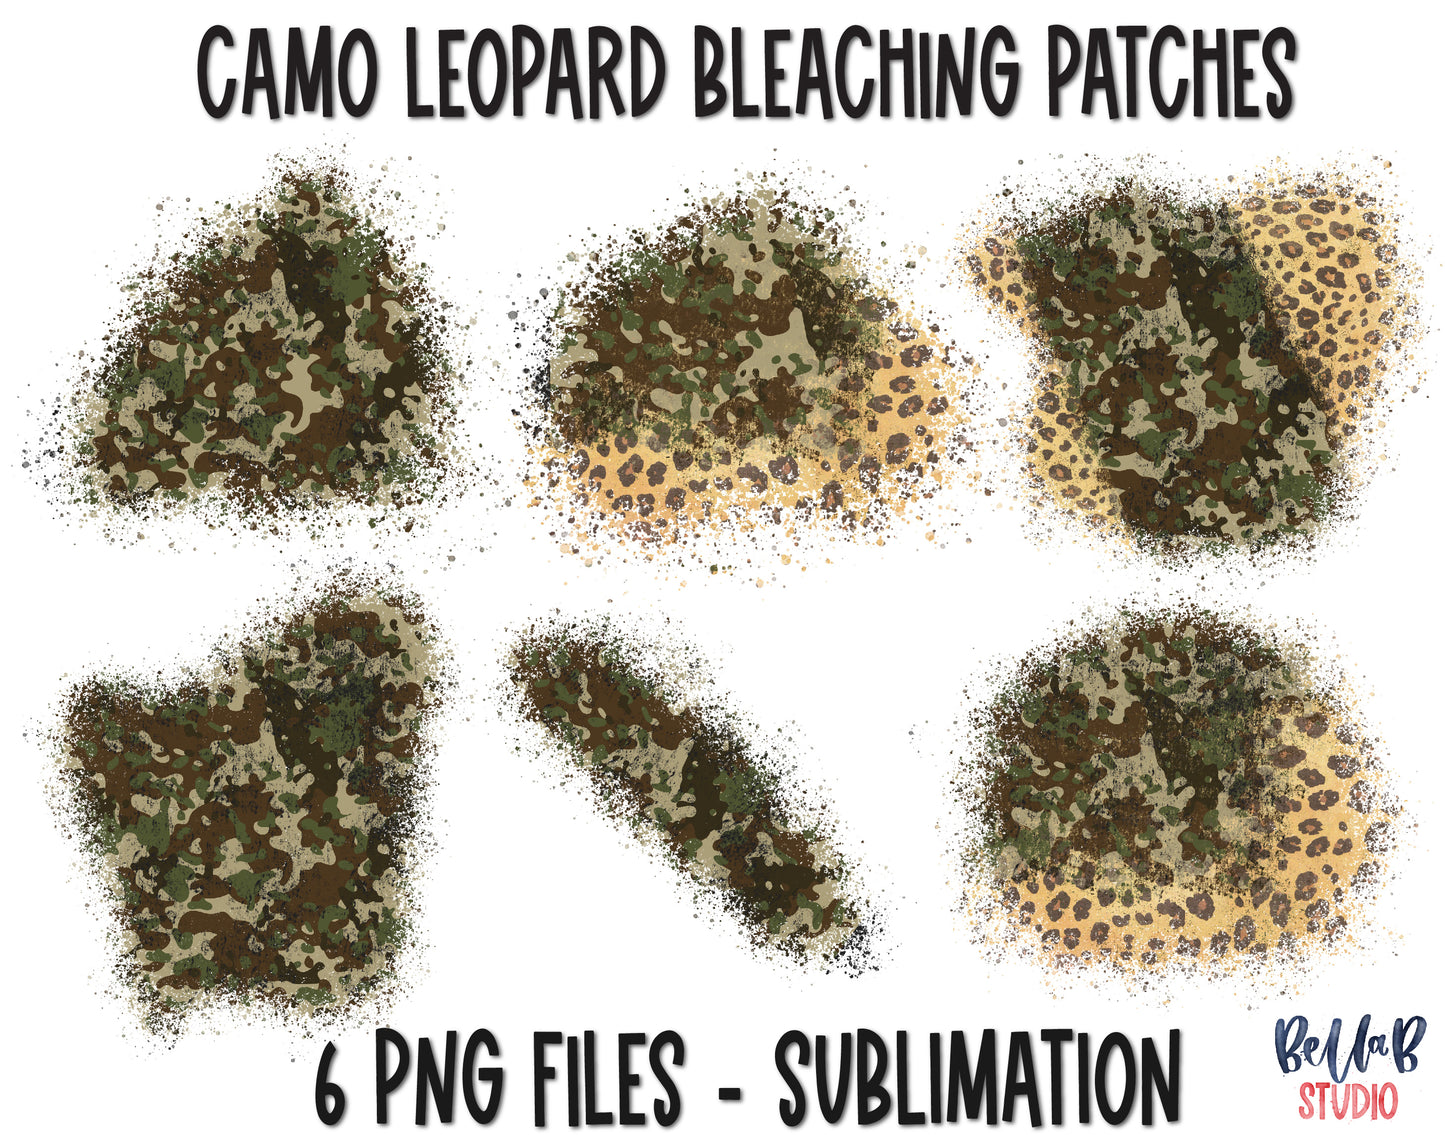 Camo and Leopard Sublimation Patches - T Shirt Bleaching Patches